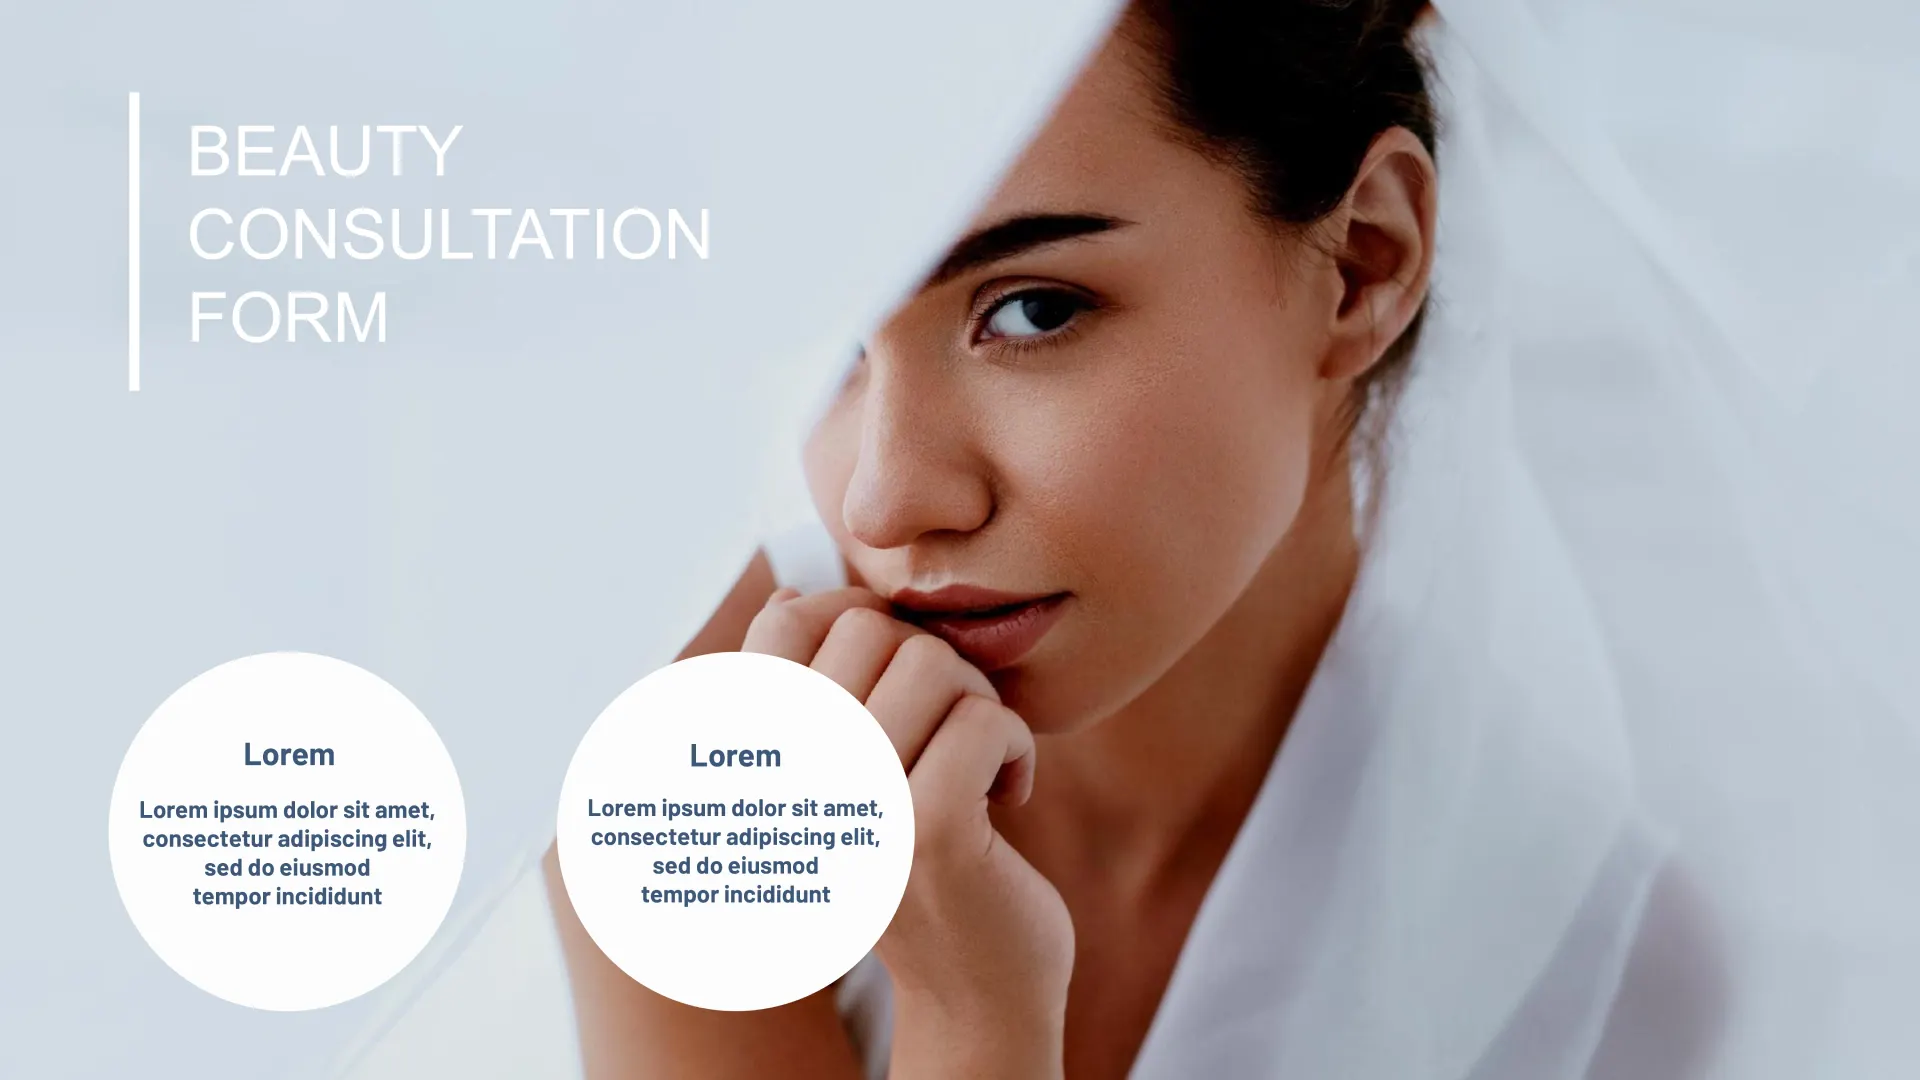 Beauty consultation form template